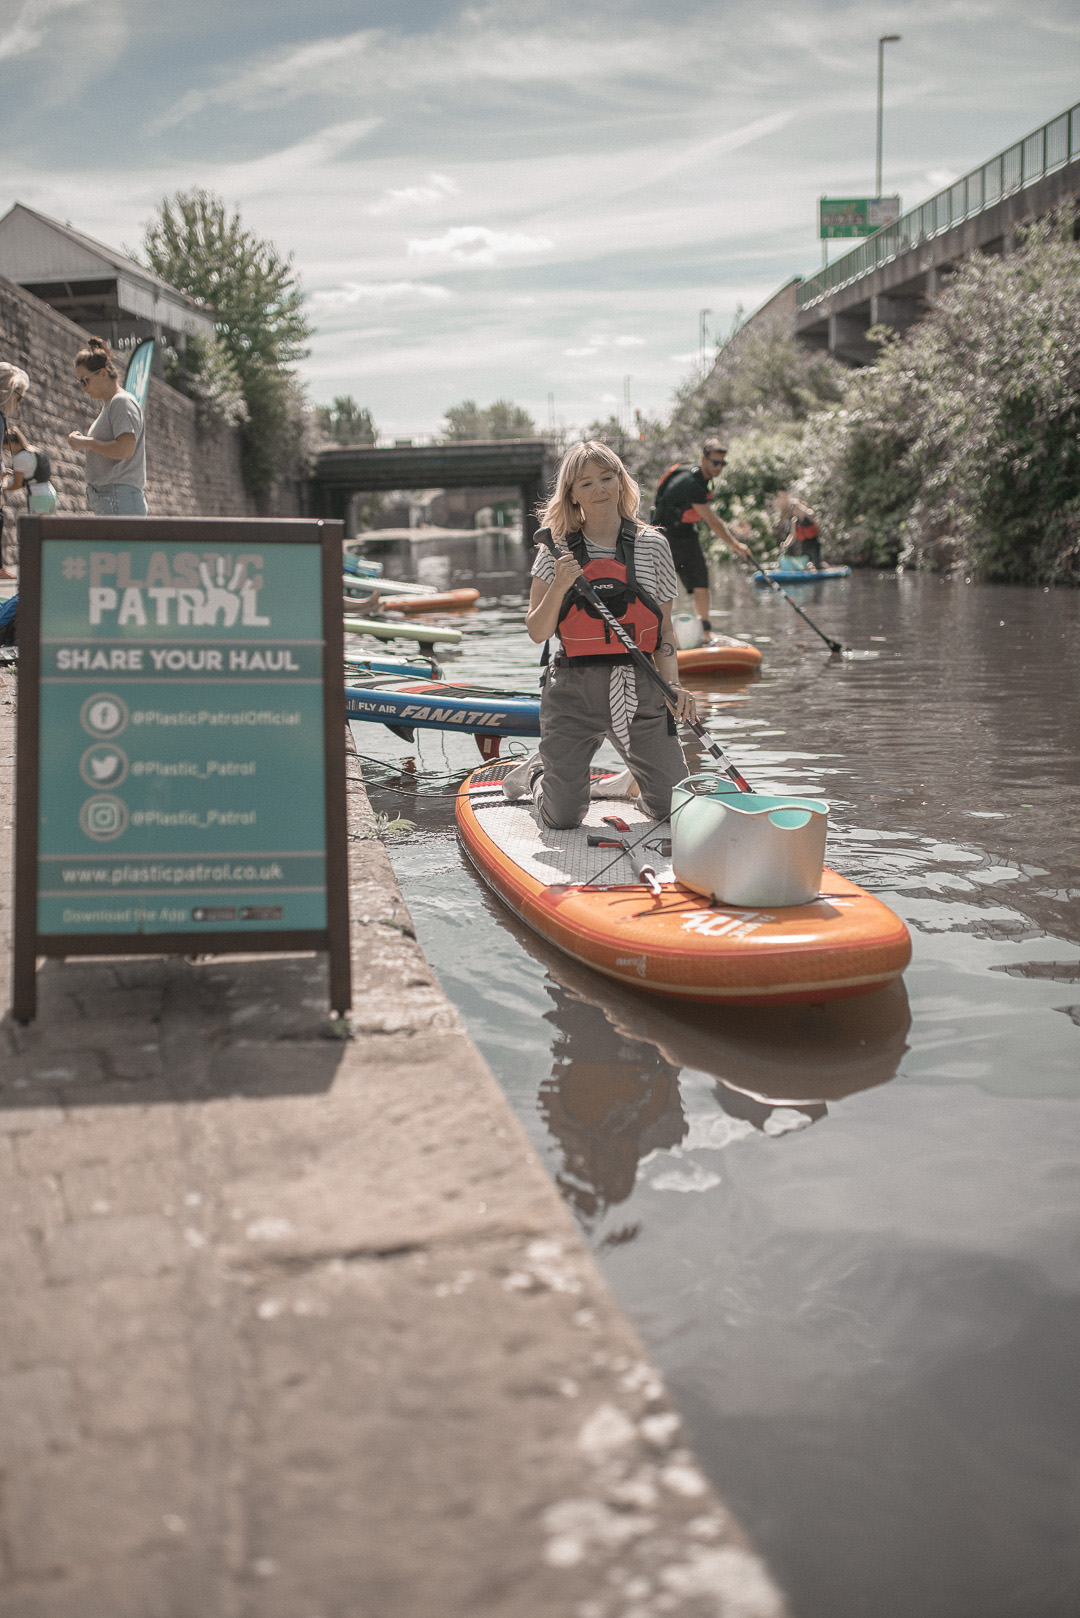 This is Plastic Patrol by Paddle Board